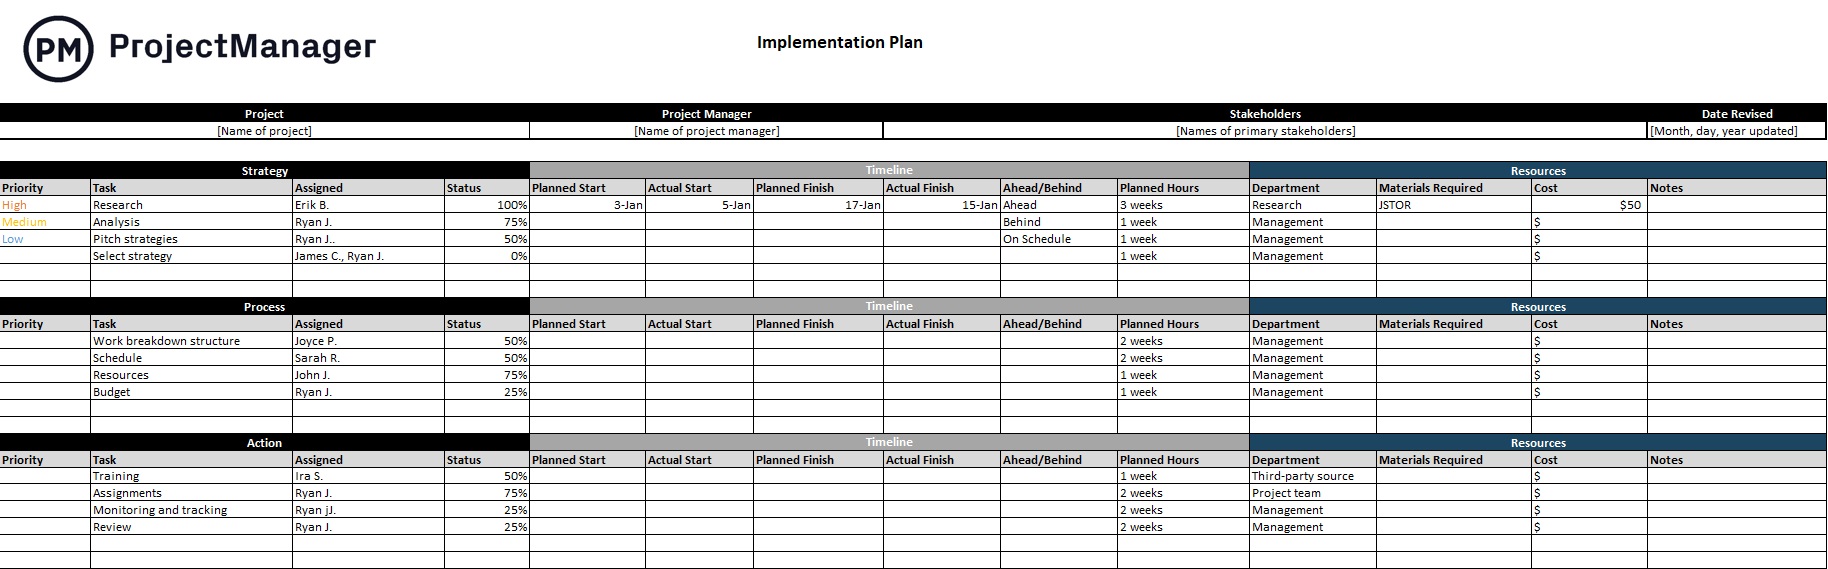 ProjectManager's implementation plan template, a Manufacturing Excel Template